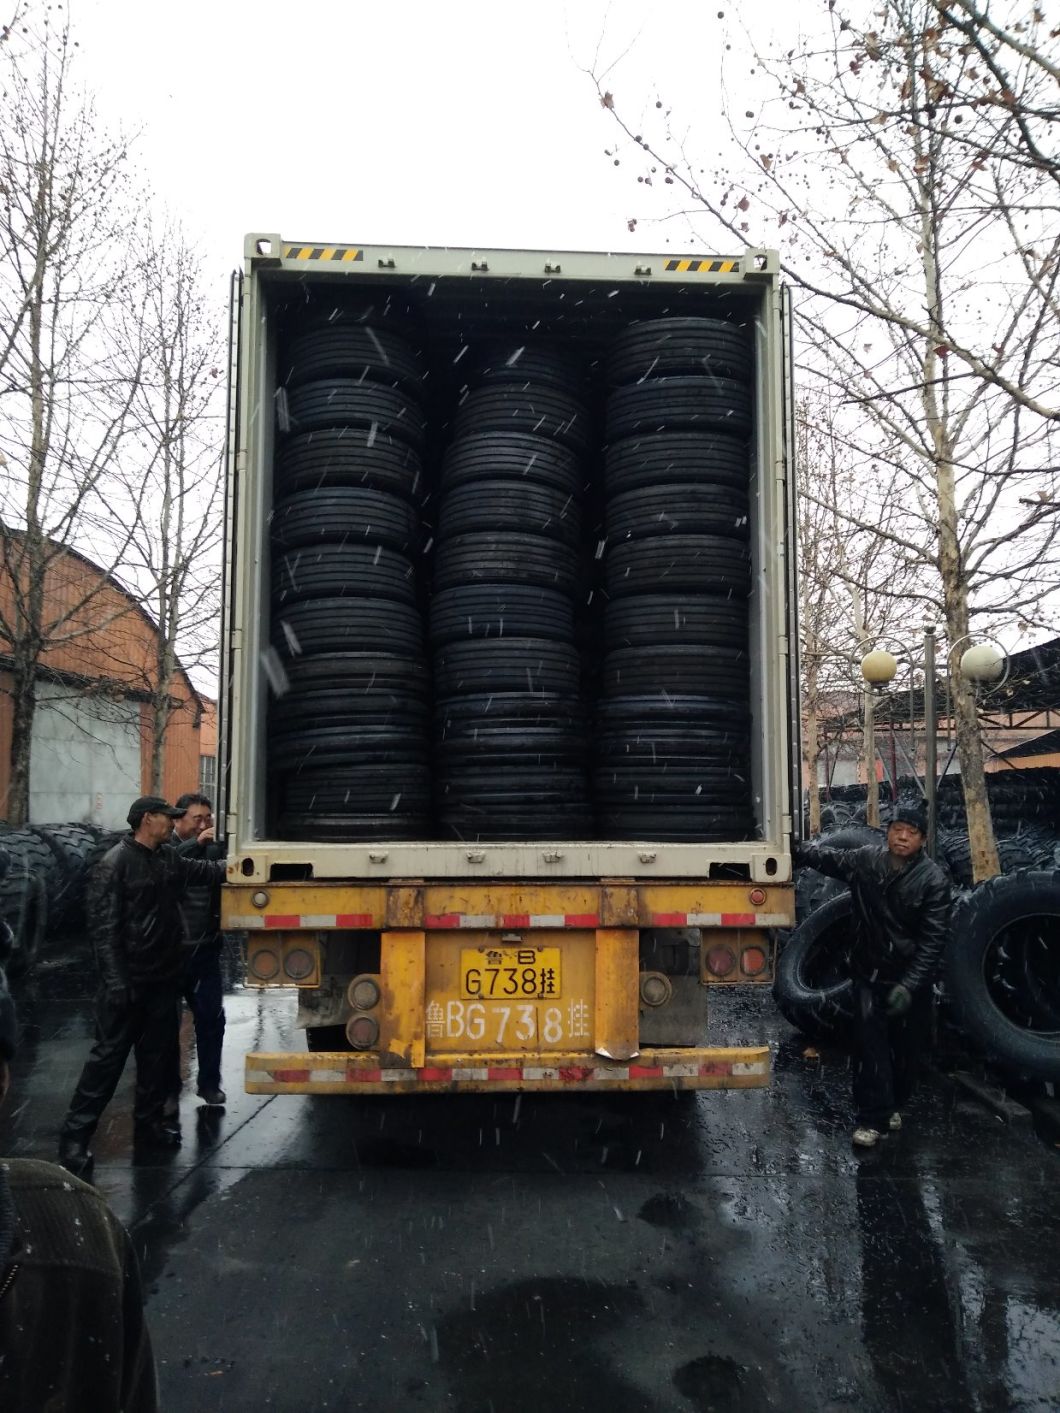 Implement Tyre Farm Tire and Agriculture Tire 11L-15, 12.5L-15